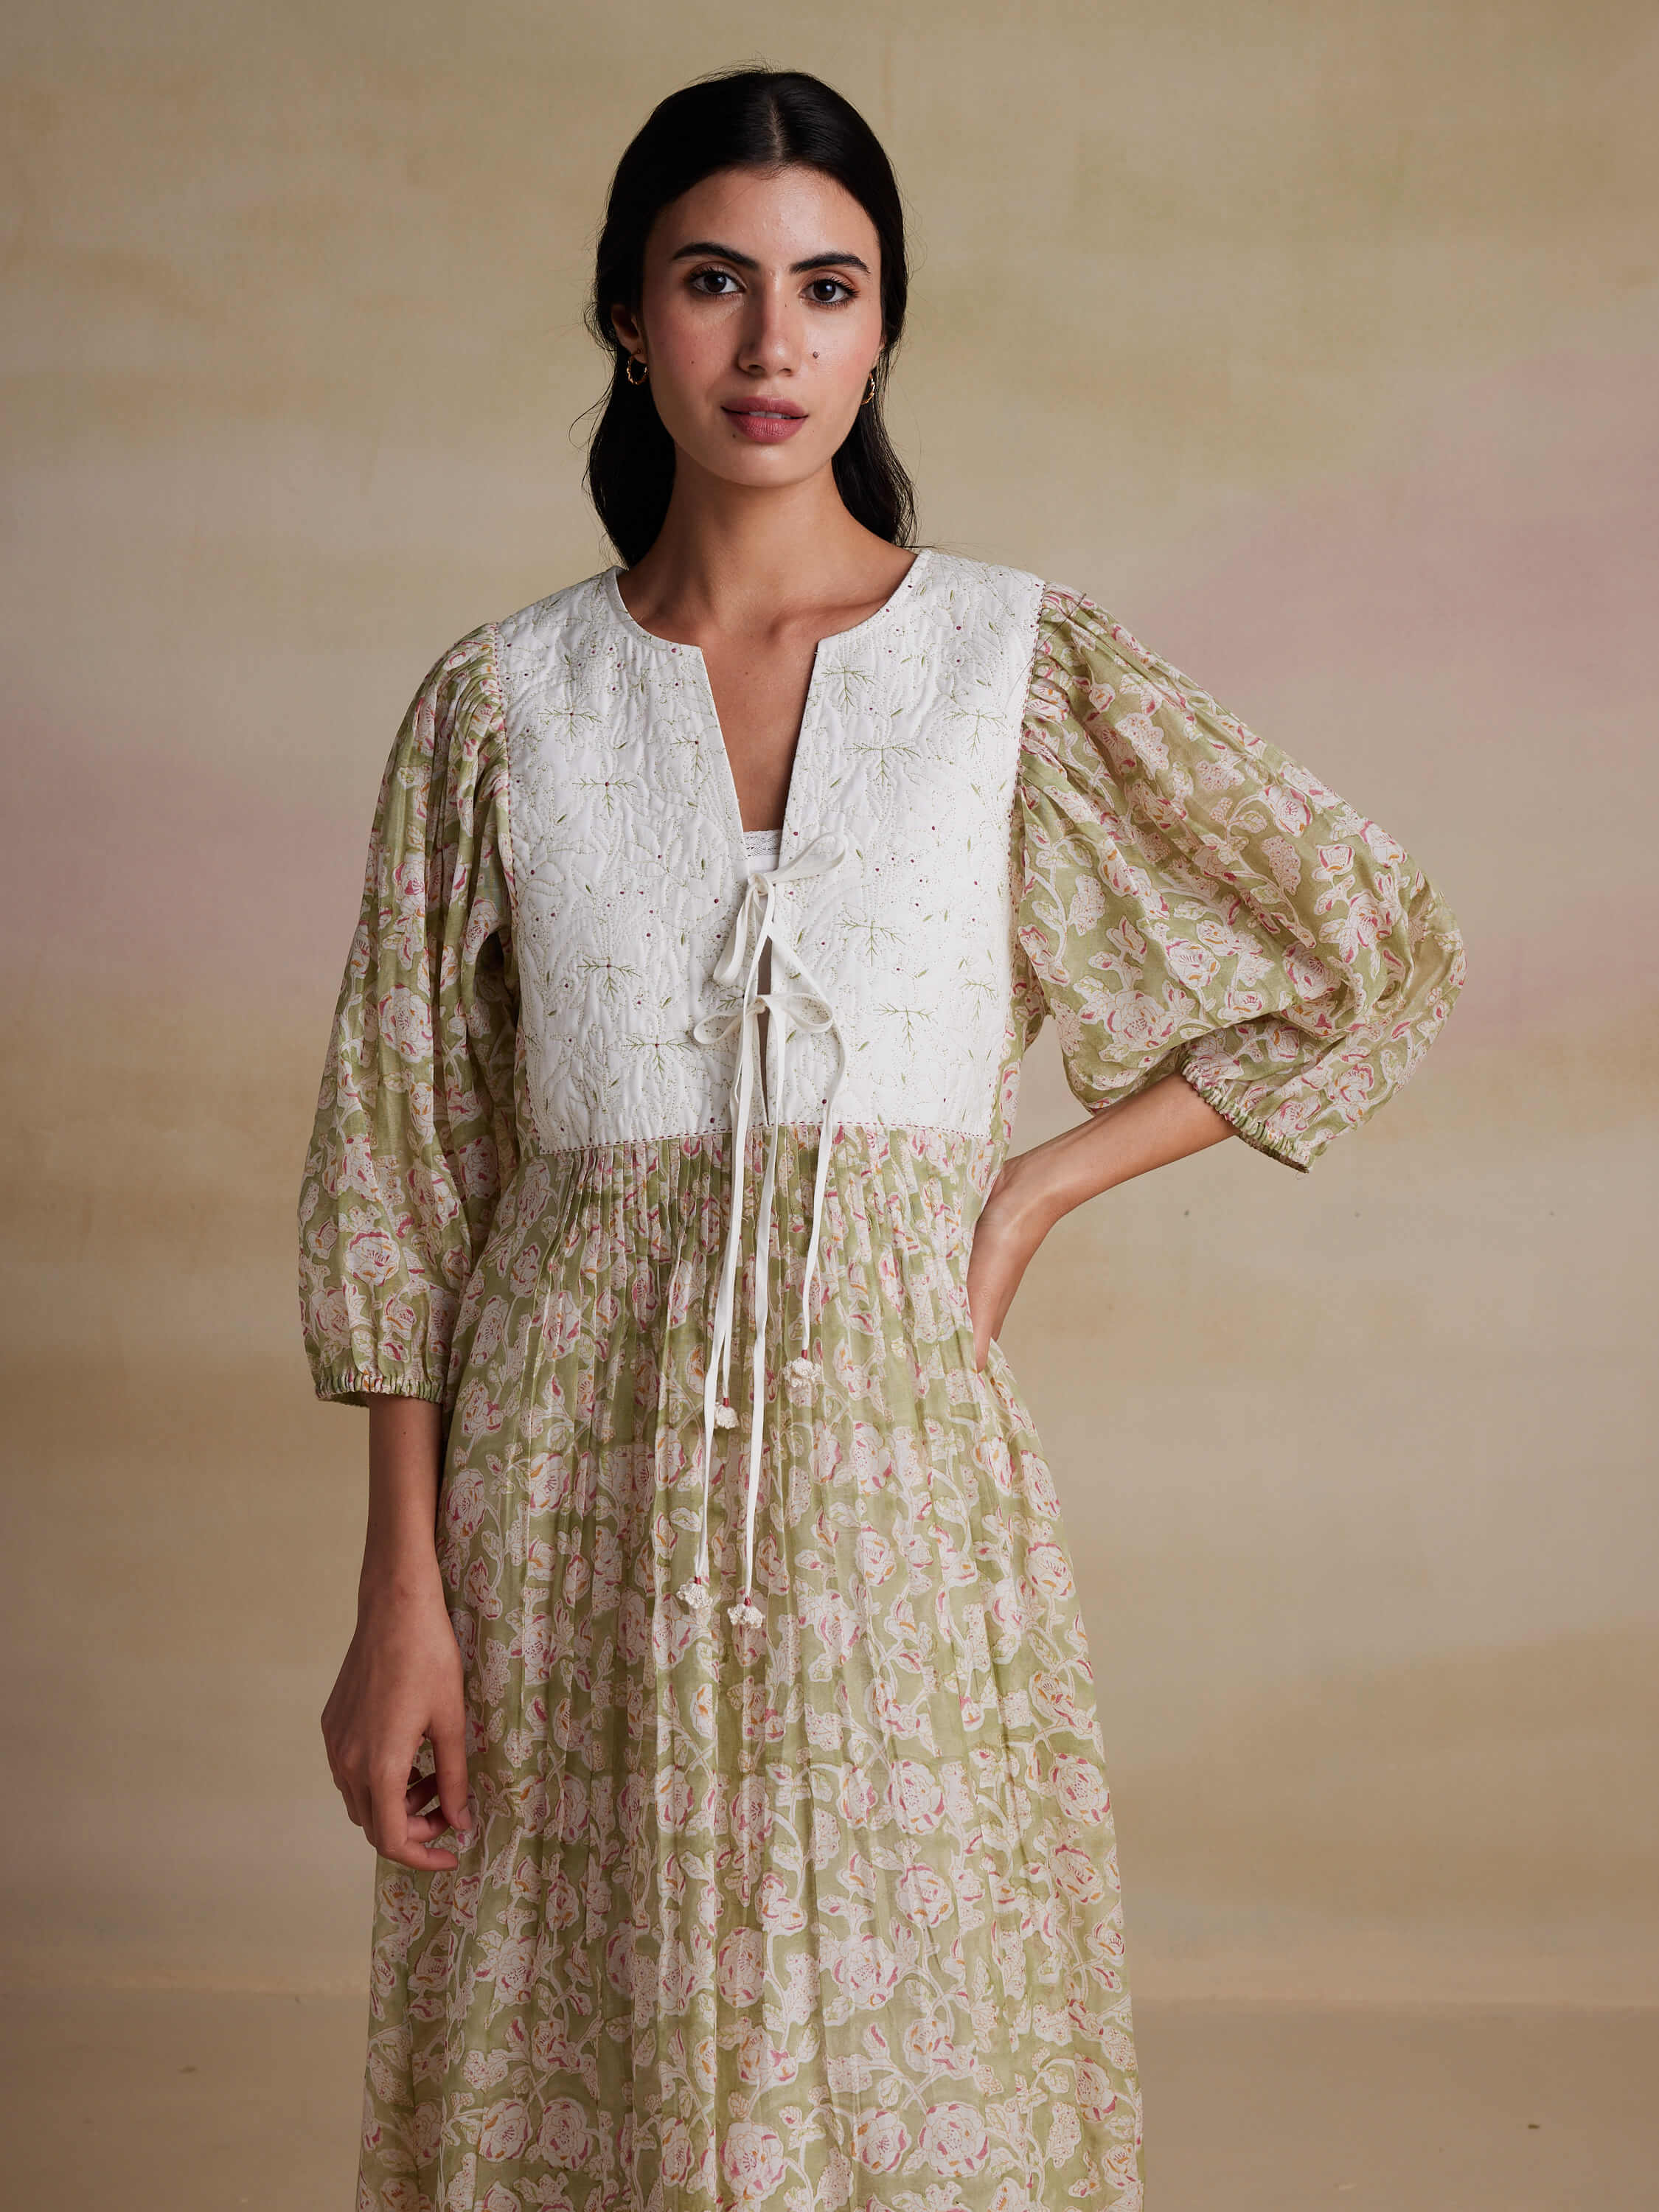 Woman in white floral dress with puffy sleeves against neutral background.